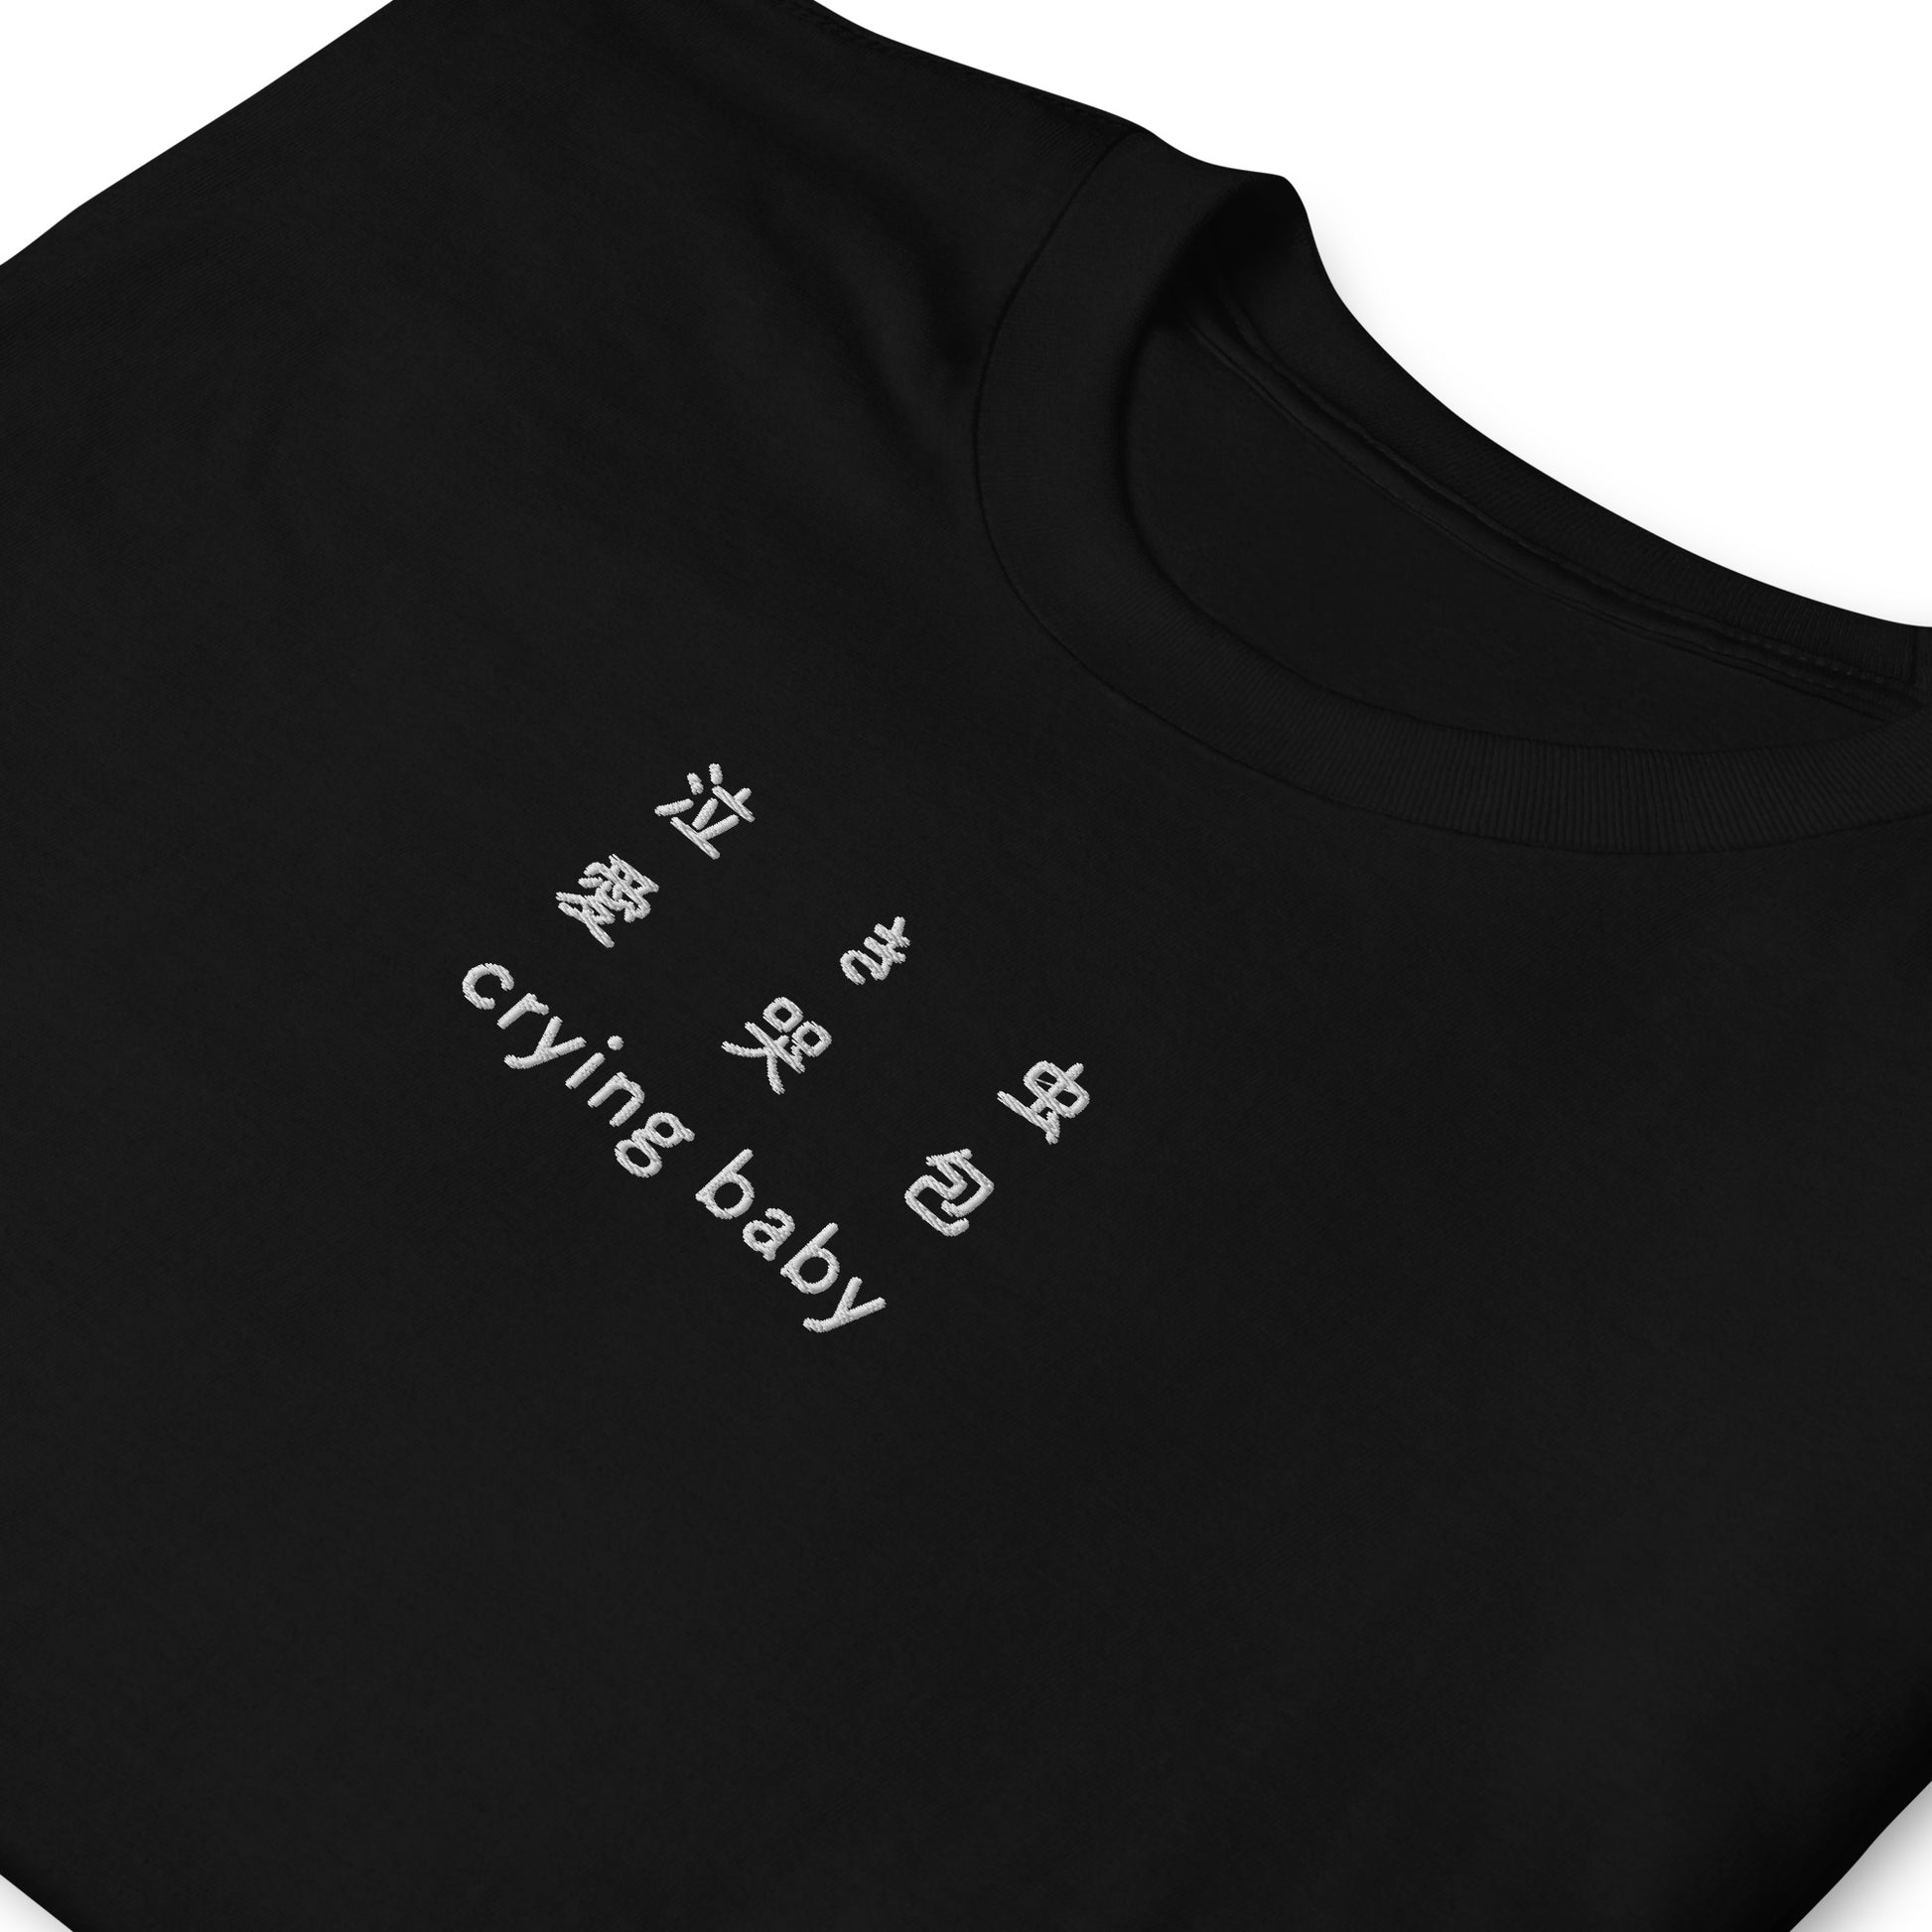 Black High Quality Tee - Front Design with an White Embroidery "Crying Baby" in Japanese,Chinese and English